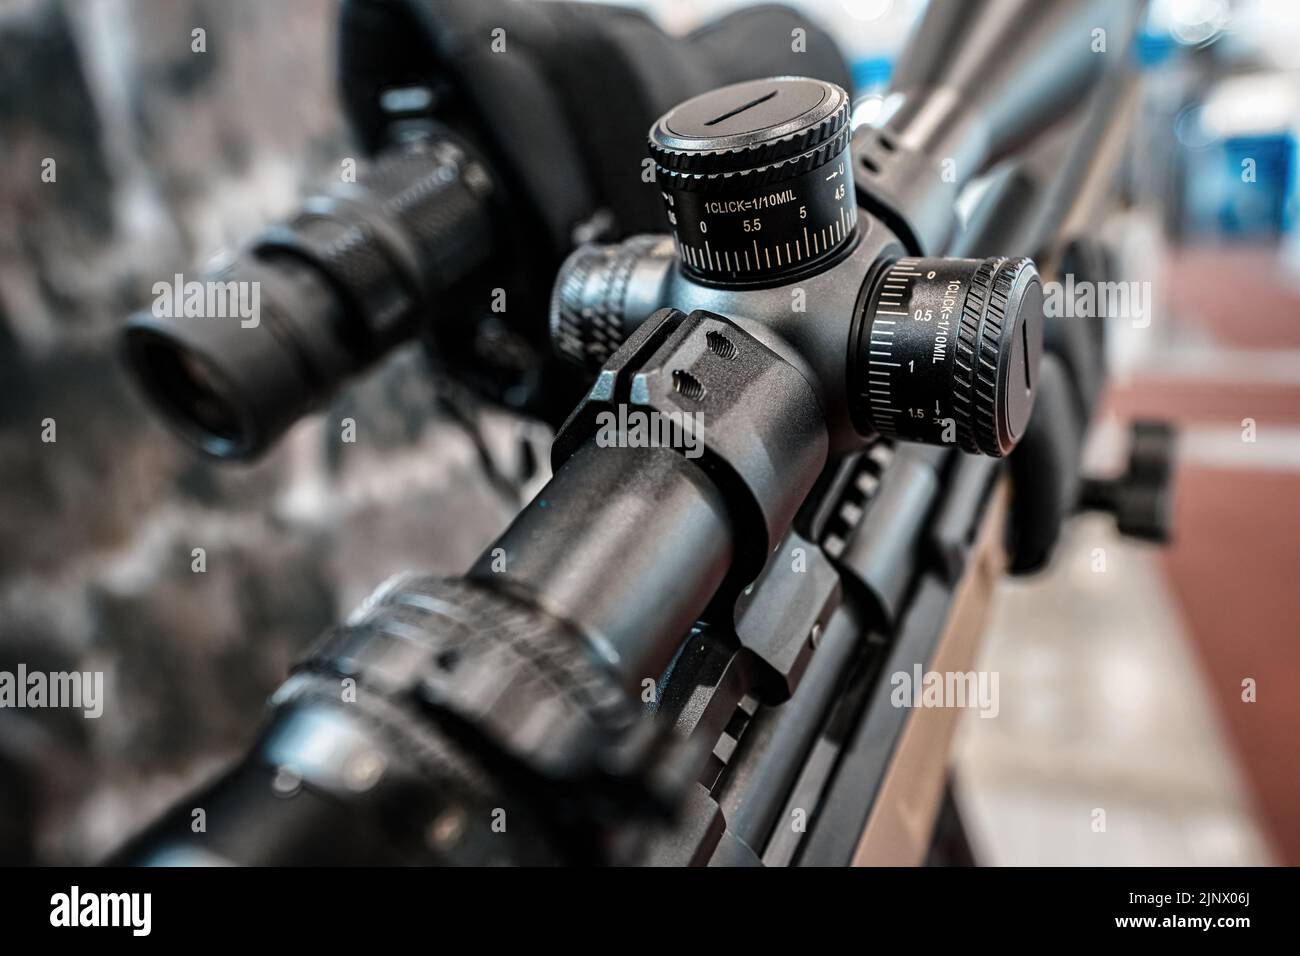 Black shooting scope optics mounted on rifle displayed at weapons exhibition fair, closeup detail to adjustment knobs Stock Photo